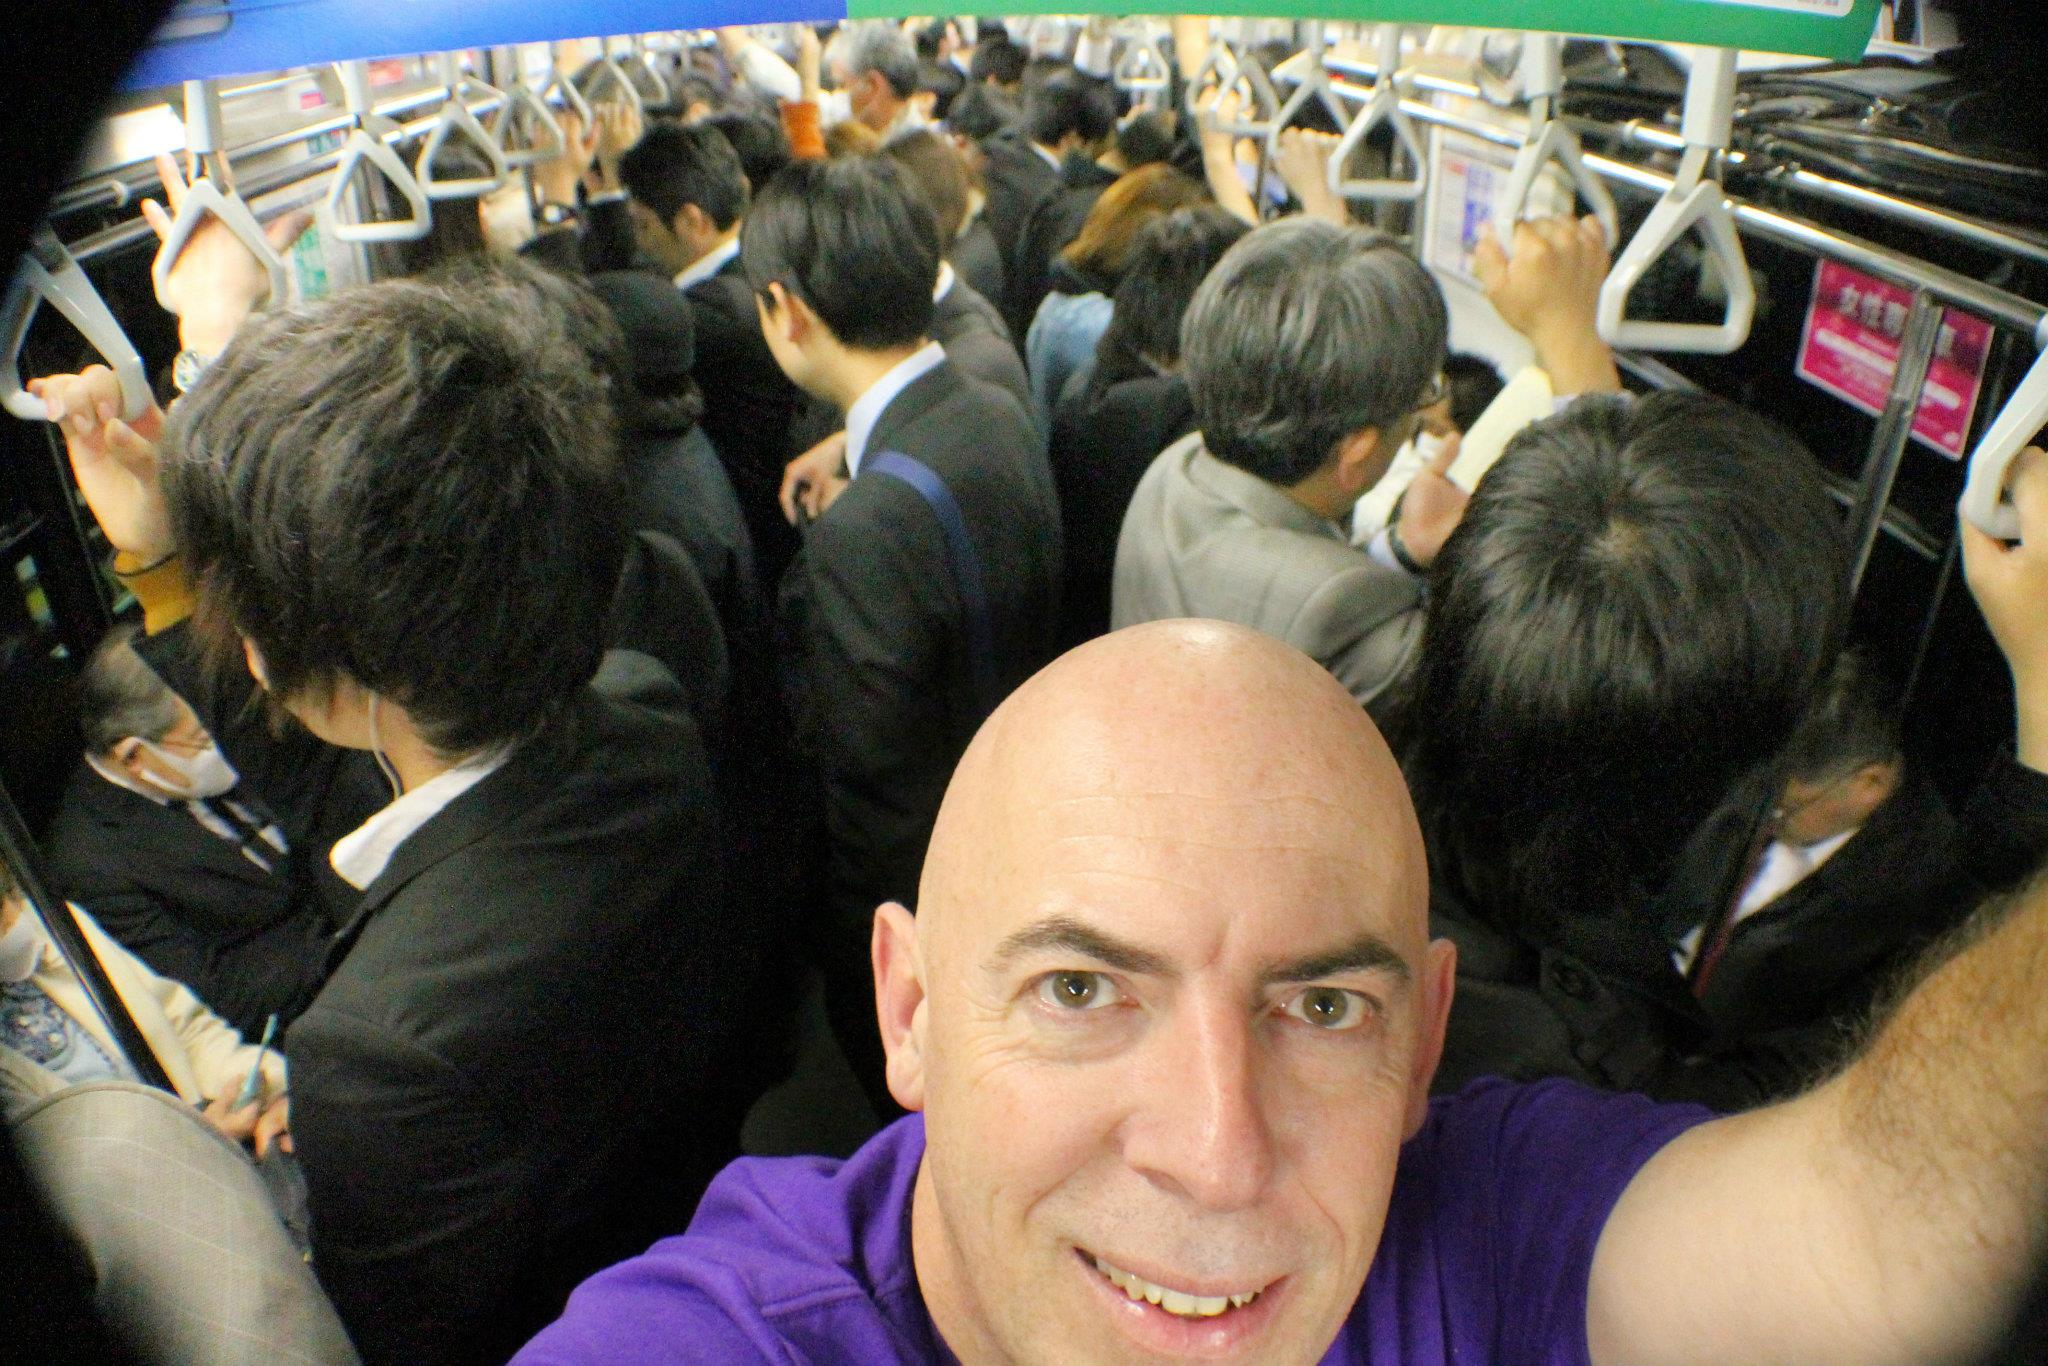 Rush hour on the subway in Tokyo